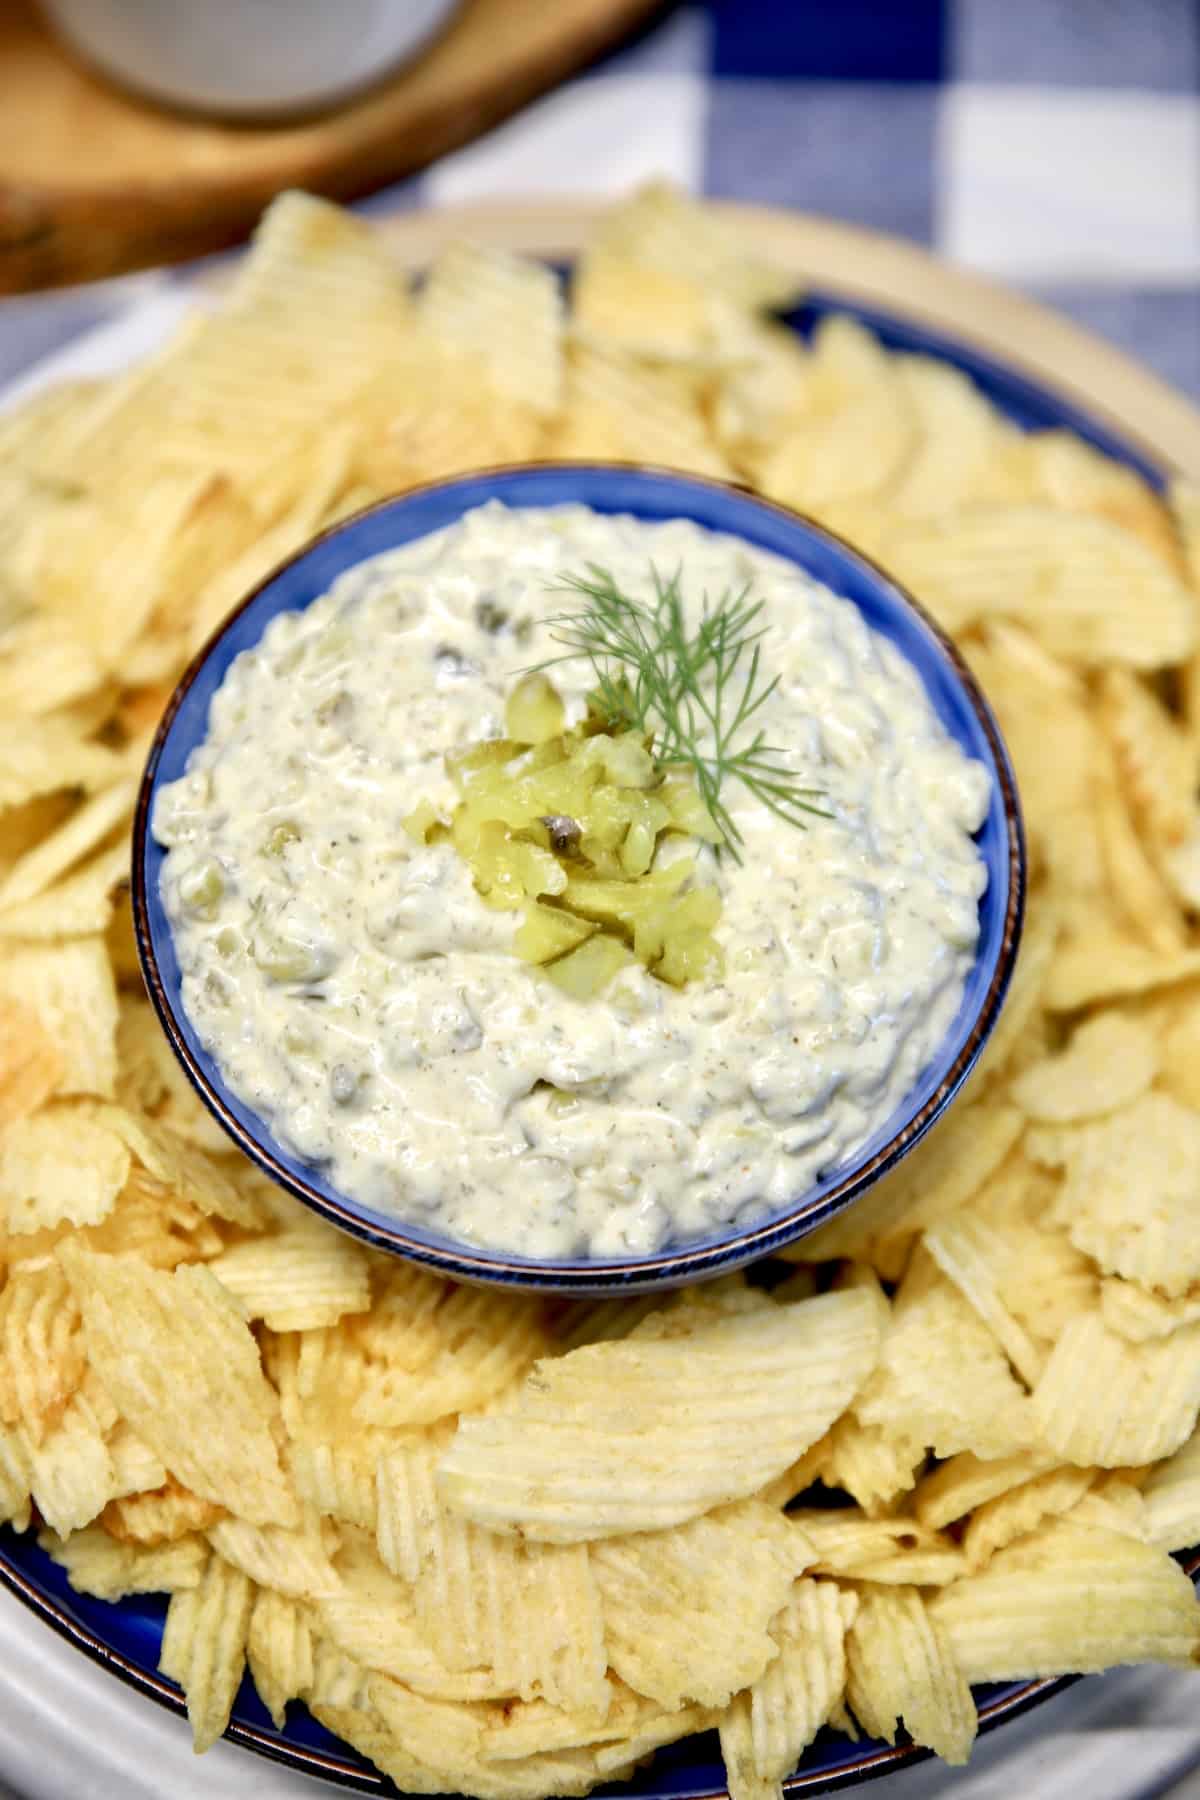 Bowl of pickle dip with potato chips.